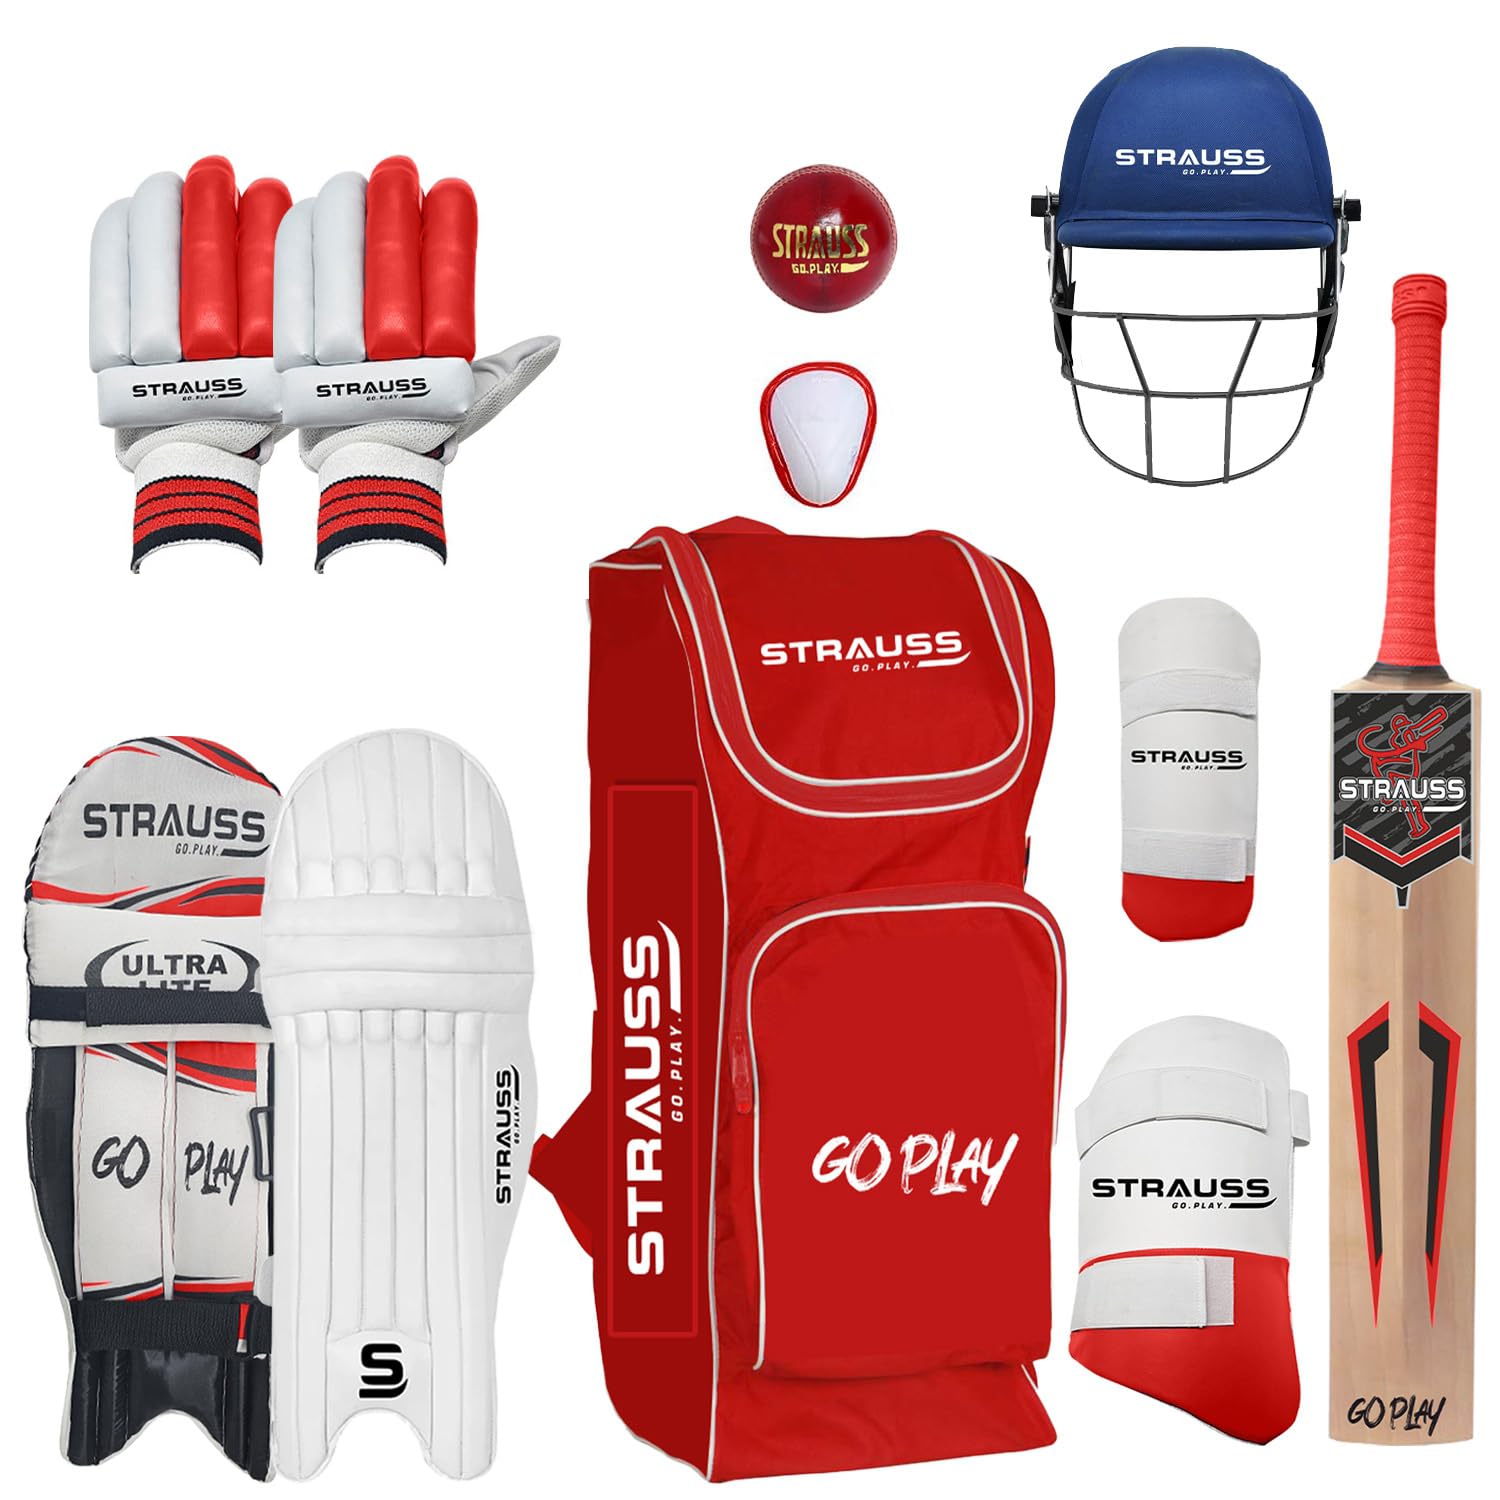 Strauss Kashmir Willow Cricket Kit Bag | Cricket Bat Set Combo with A Leather Cricket Ball| Ideal for Age Group 15+ | Set of 9 (Red) (Youth)